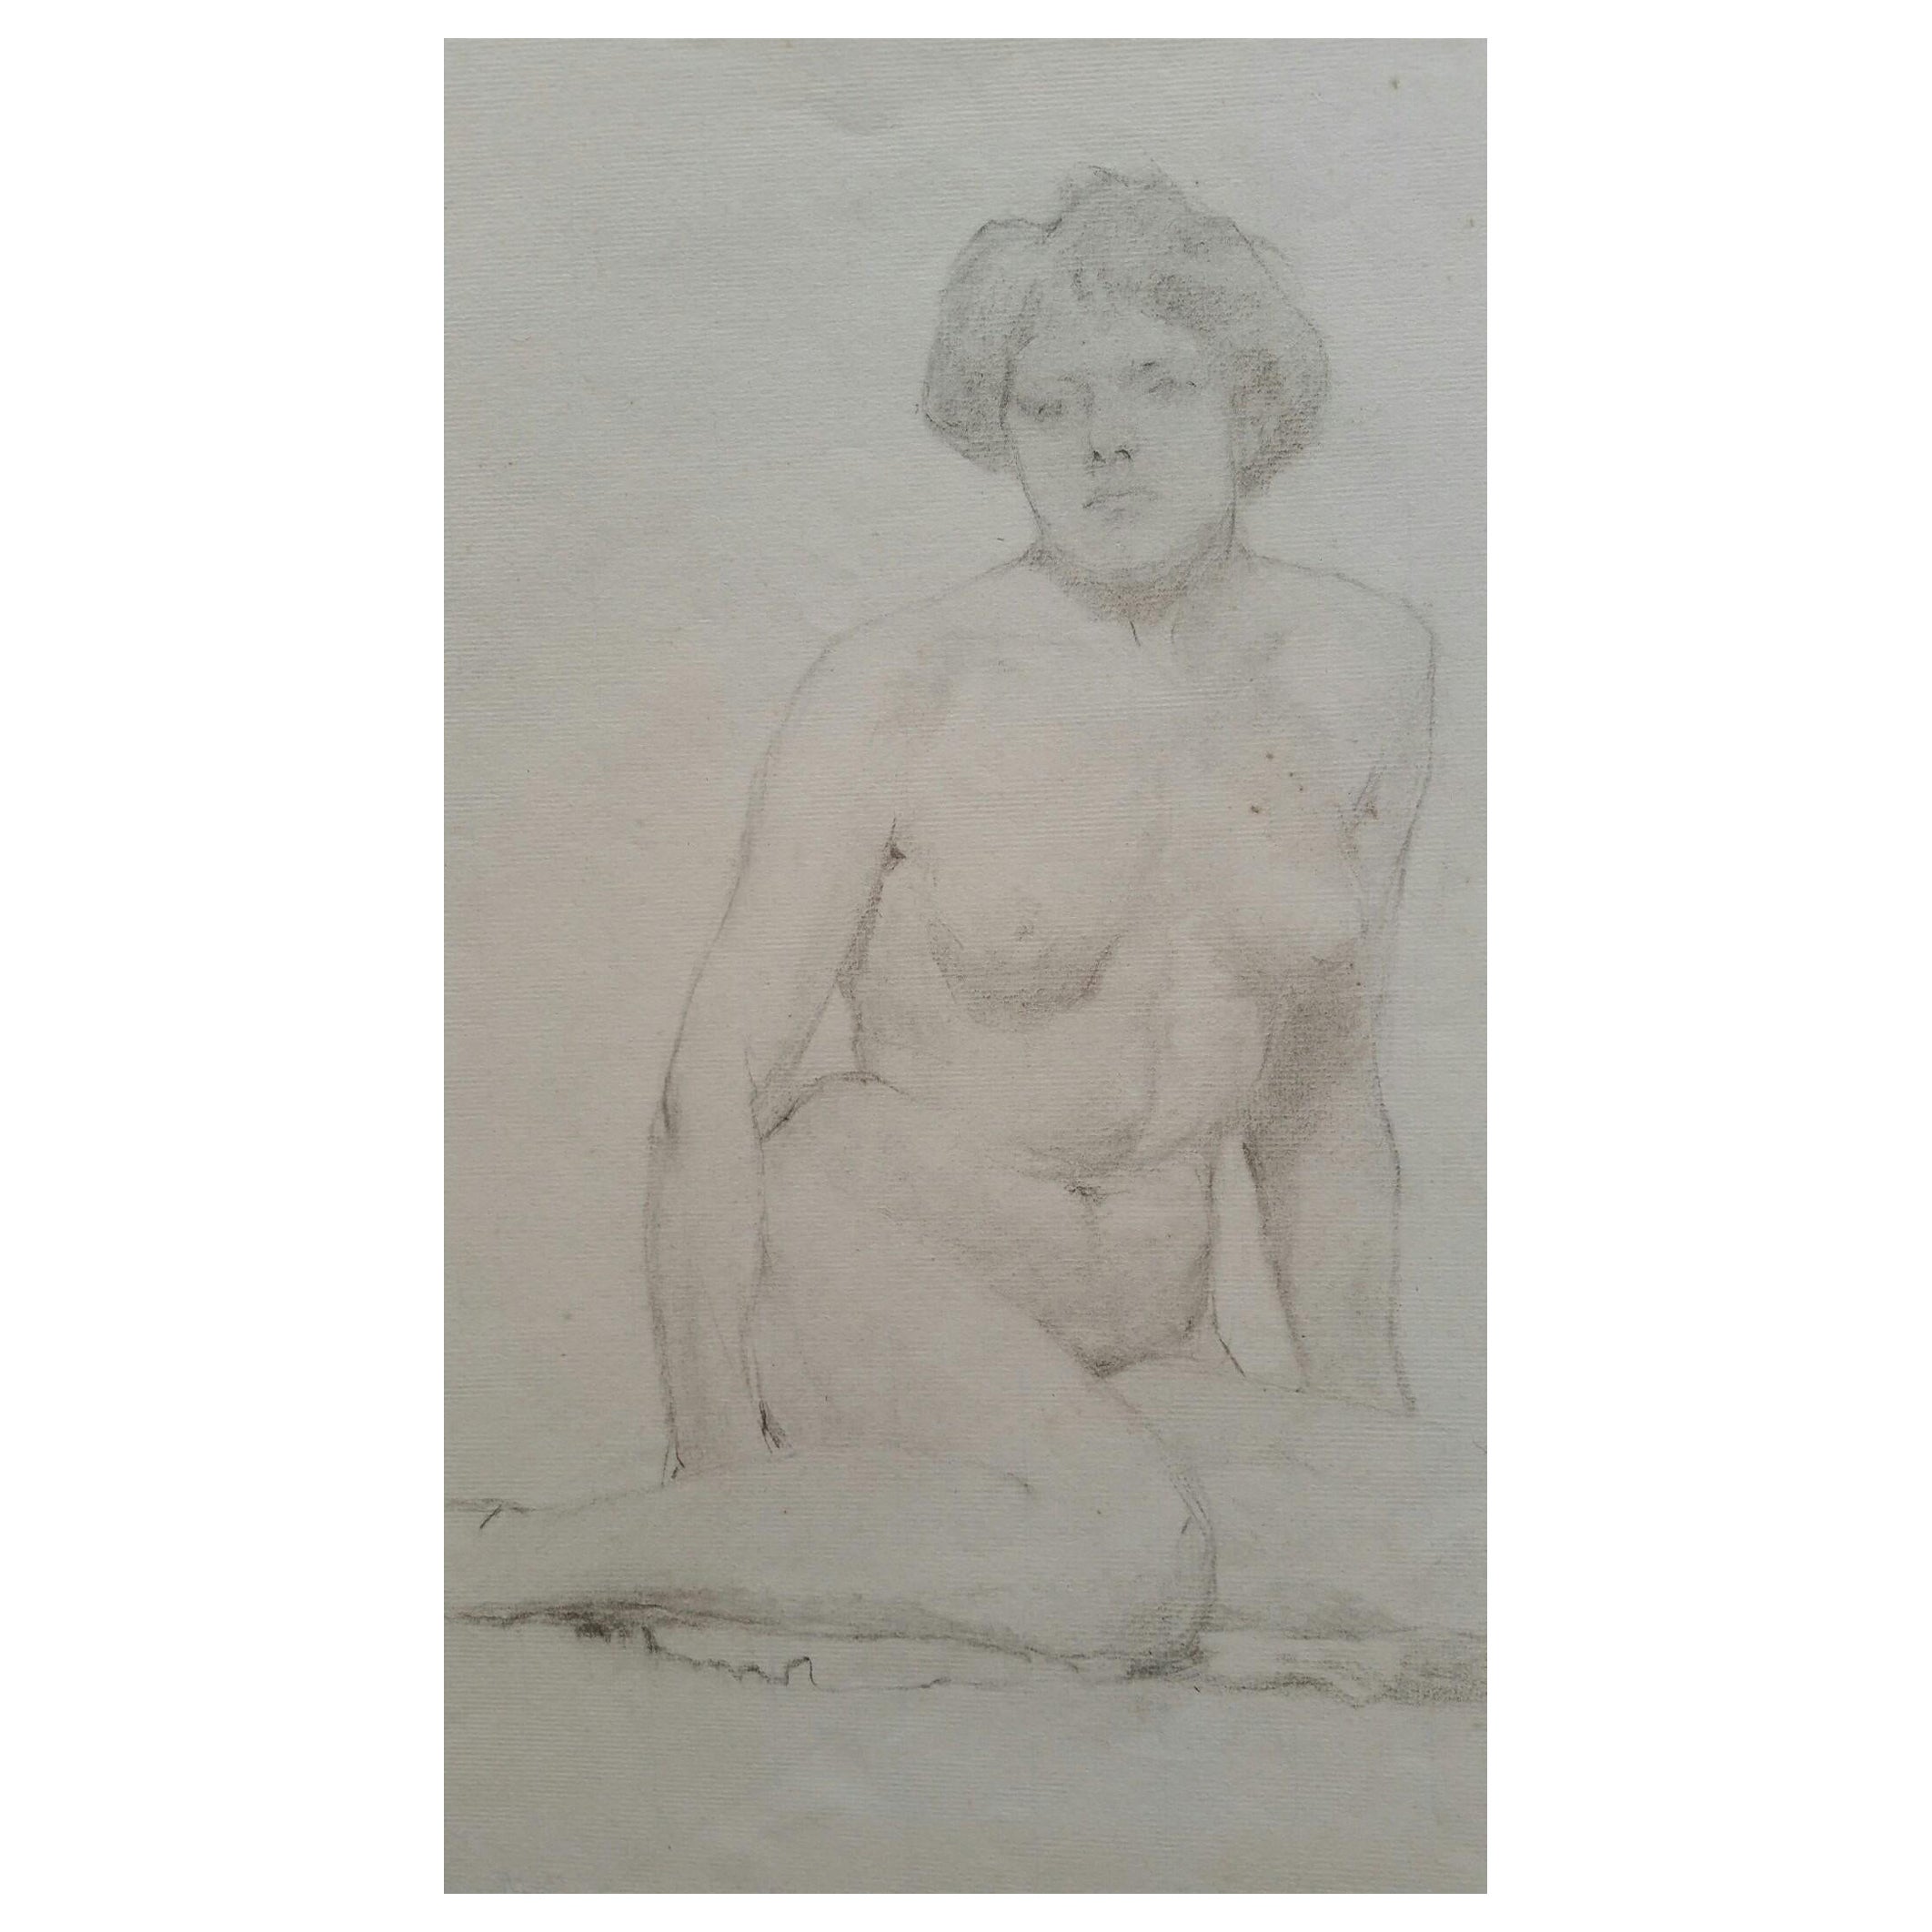 English Graphite Portrait Sketch of Female Nude, Seated